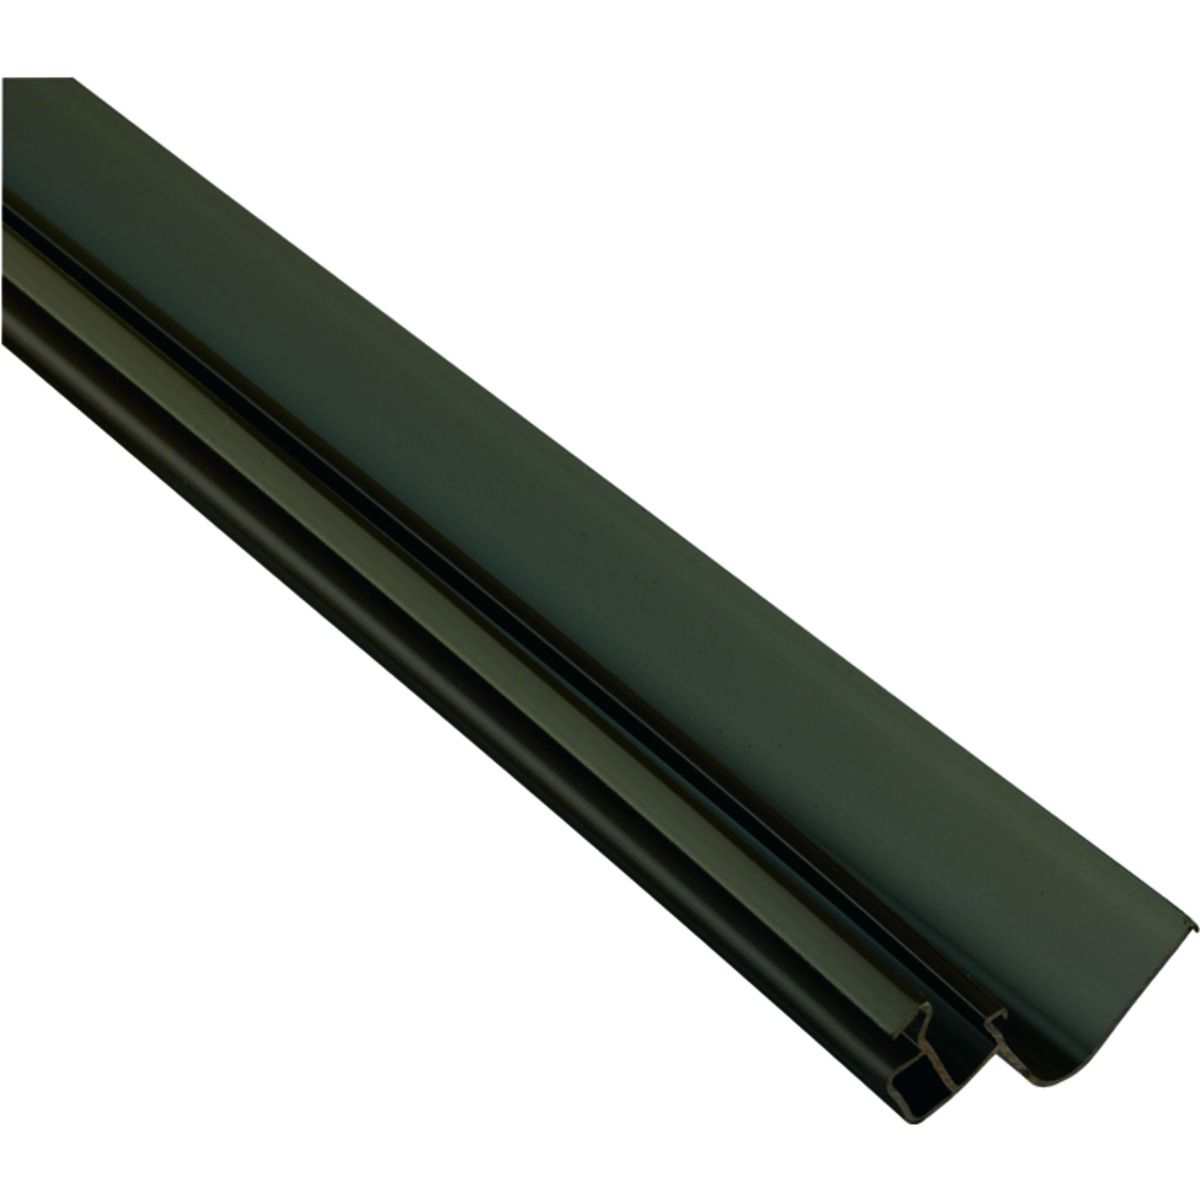 Image of Wickes Universal Edge Flashing for Polycarbonate Sheets - Brown 3m